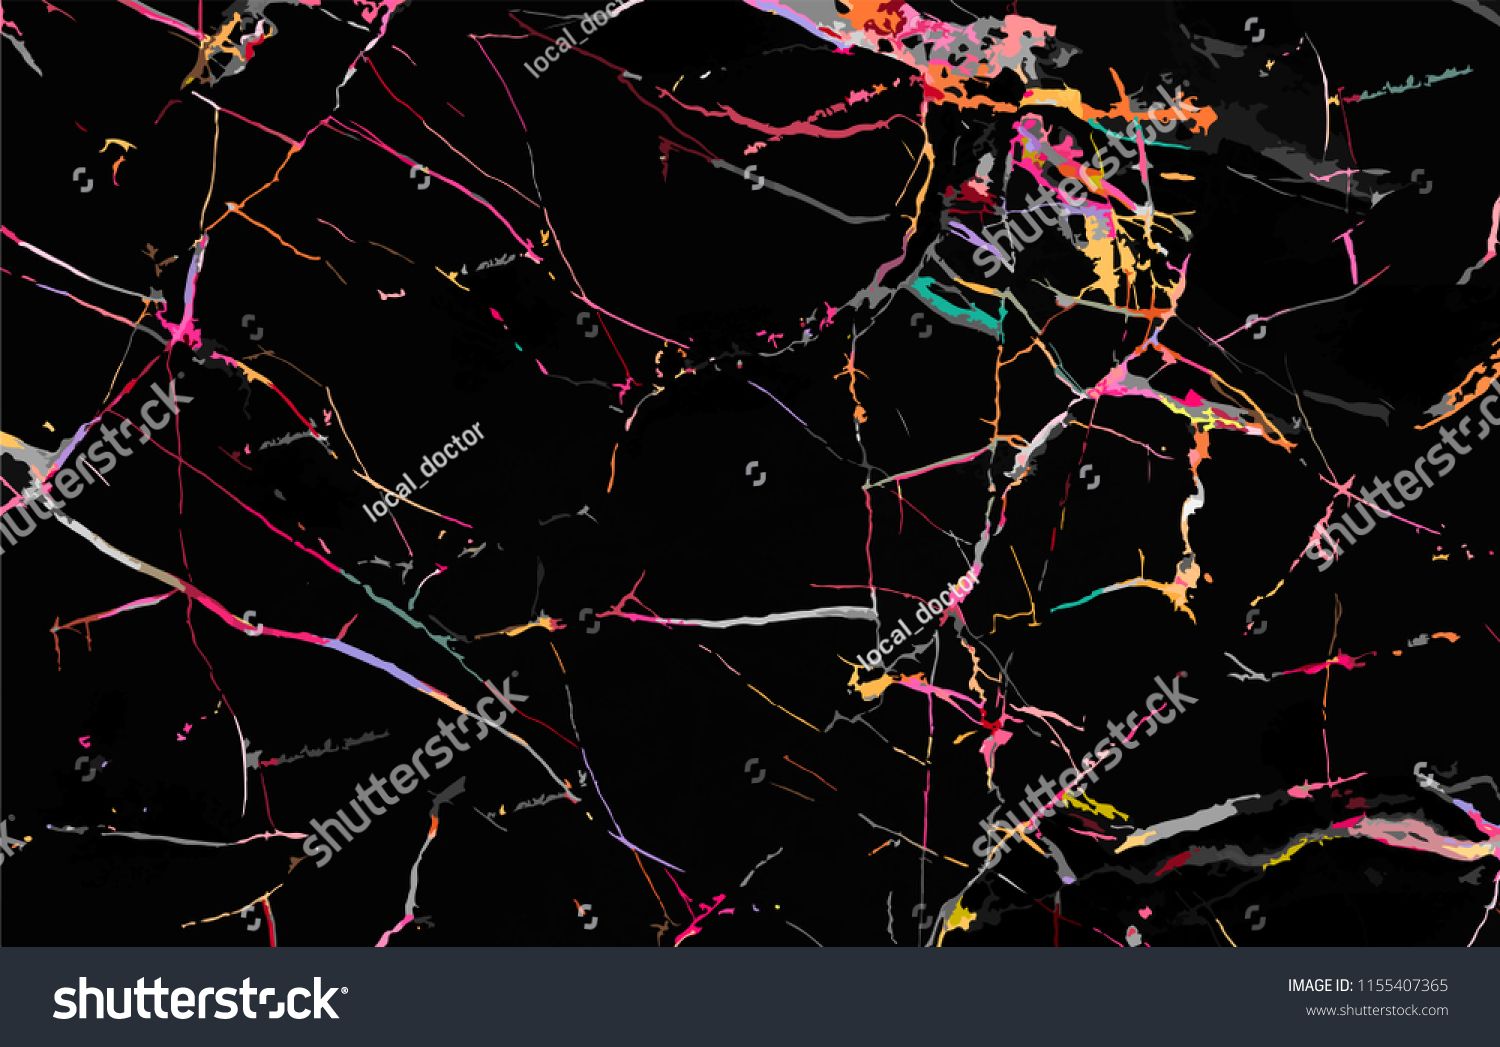 Scratchy Texture Of Marble With Colorful Veins Abstract Vector